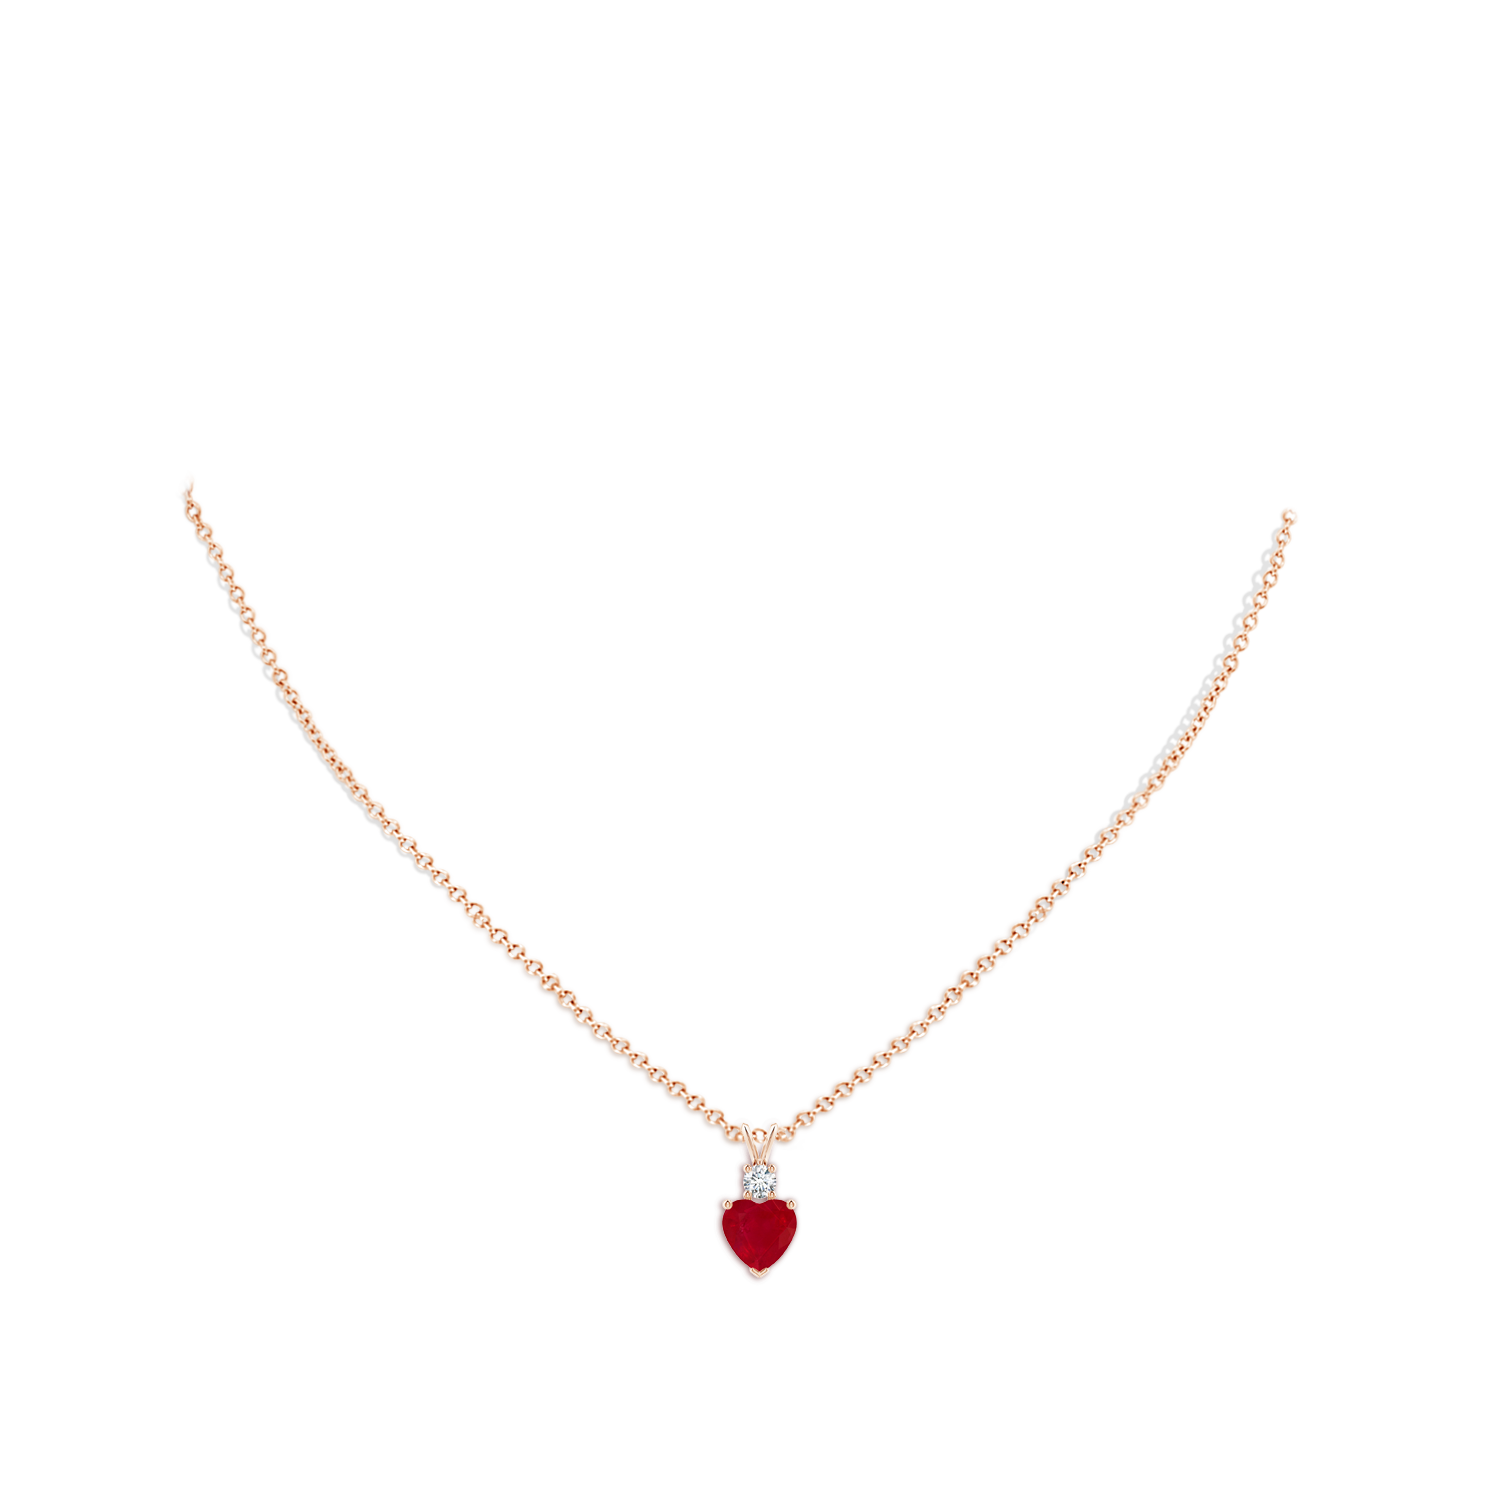 AA - Ruby / 1.8 CT / 14 KT Rose Gold